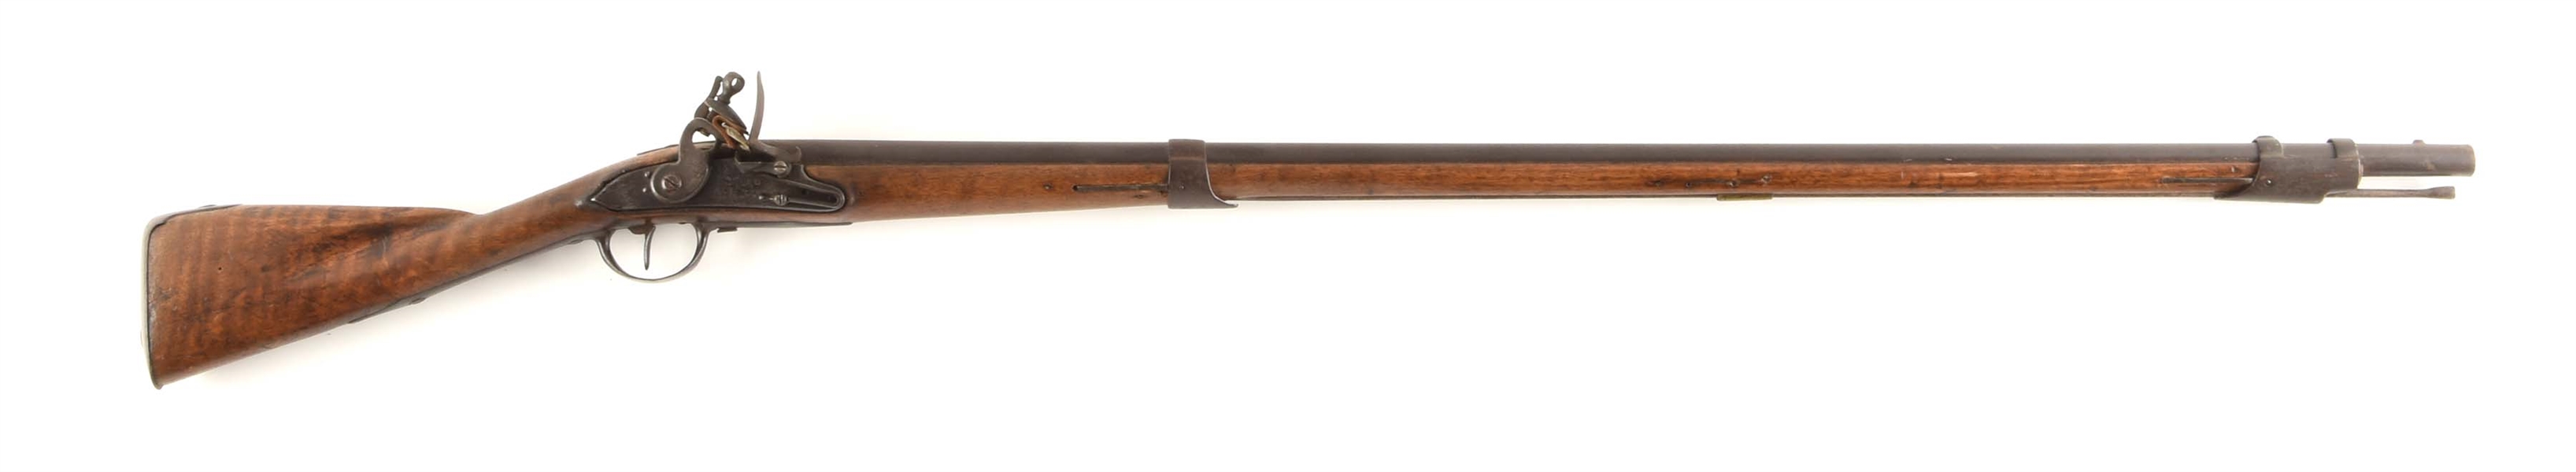 (A) AMERICAN ALTERED FRENCH MODEL 1766 CHARLEVILLE FLINTLOCK MUSKET.